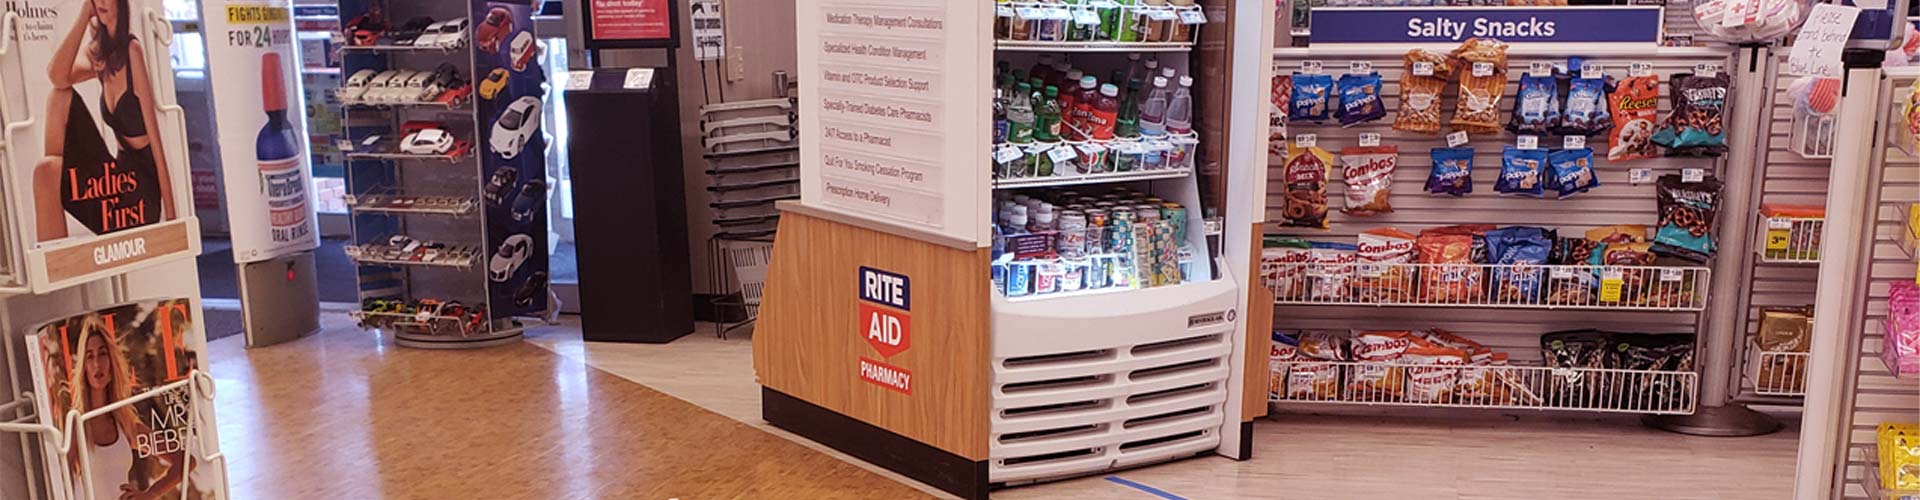 Caring During COVID-19 Crisis blog banner featuring inside of a RiteAid during COVID pandemic